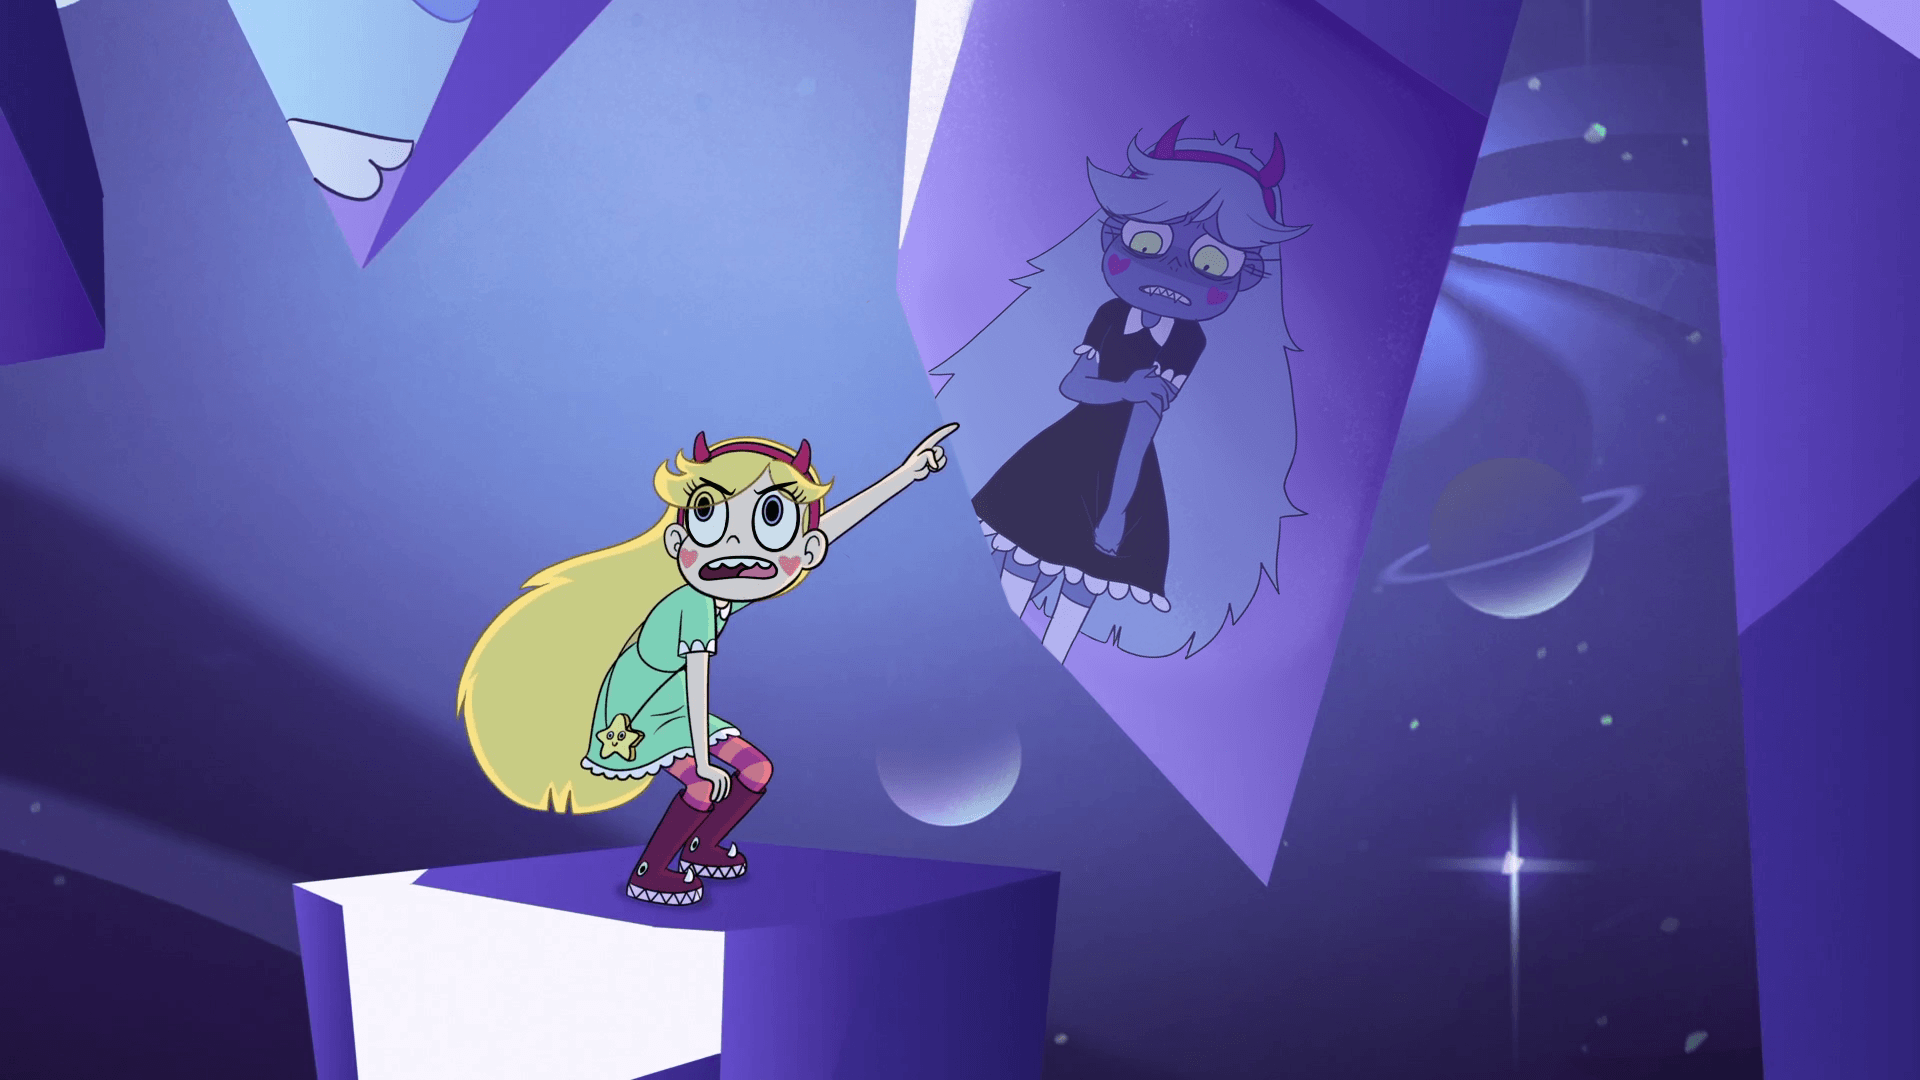 Star sees MonStar AU. Star vs. the Forces of Evil